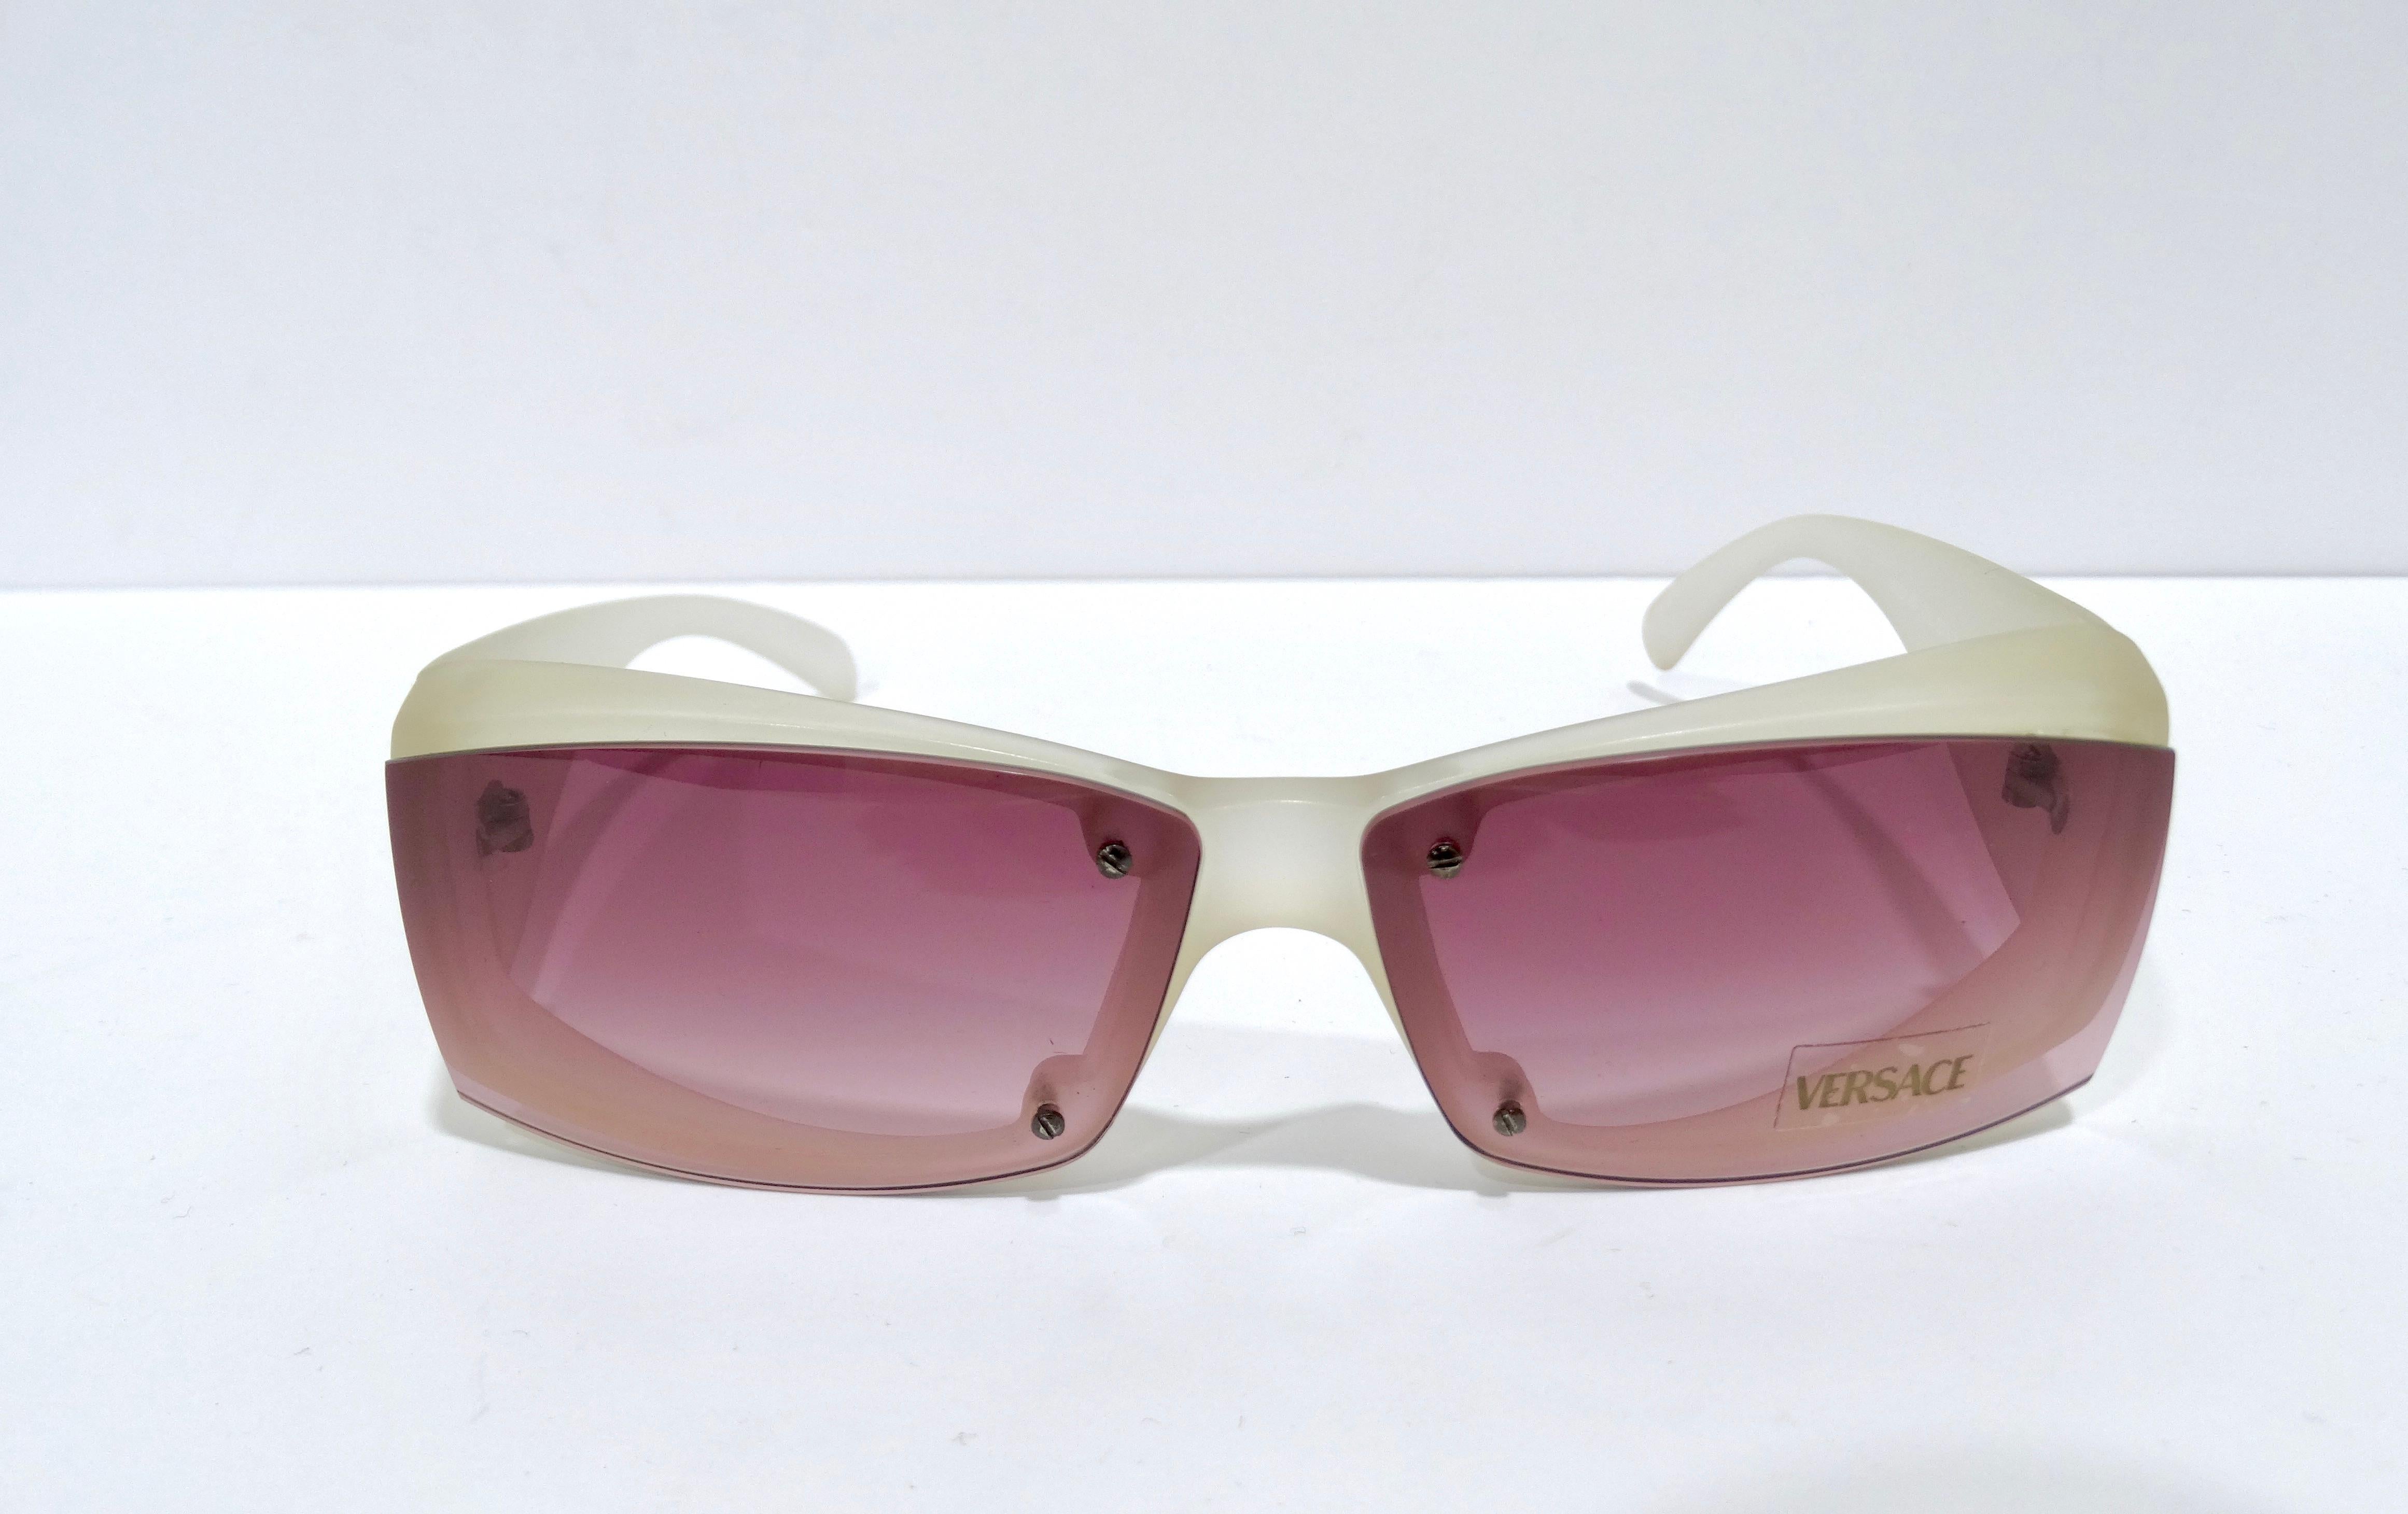 Everyone needs a pair of edgy sunglasses in their collection. This can take any outfit up 10 notches. These violet lenses is perfect to add a pop of color to any outfit and the modern touches will keep you reaching for them. Features include violet